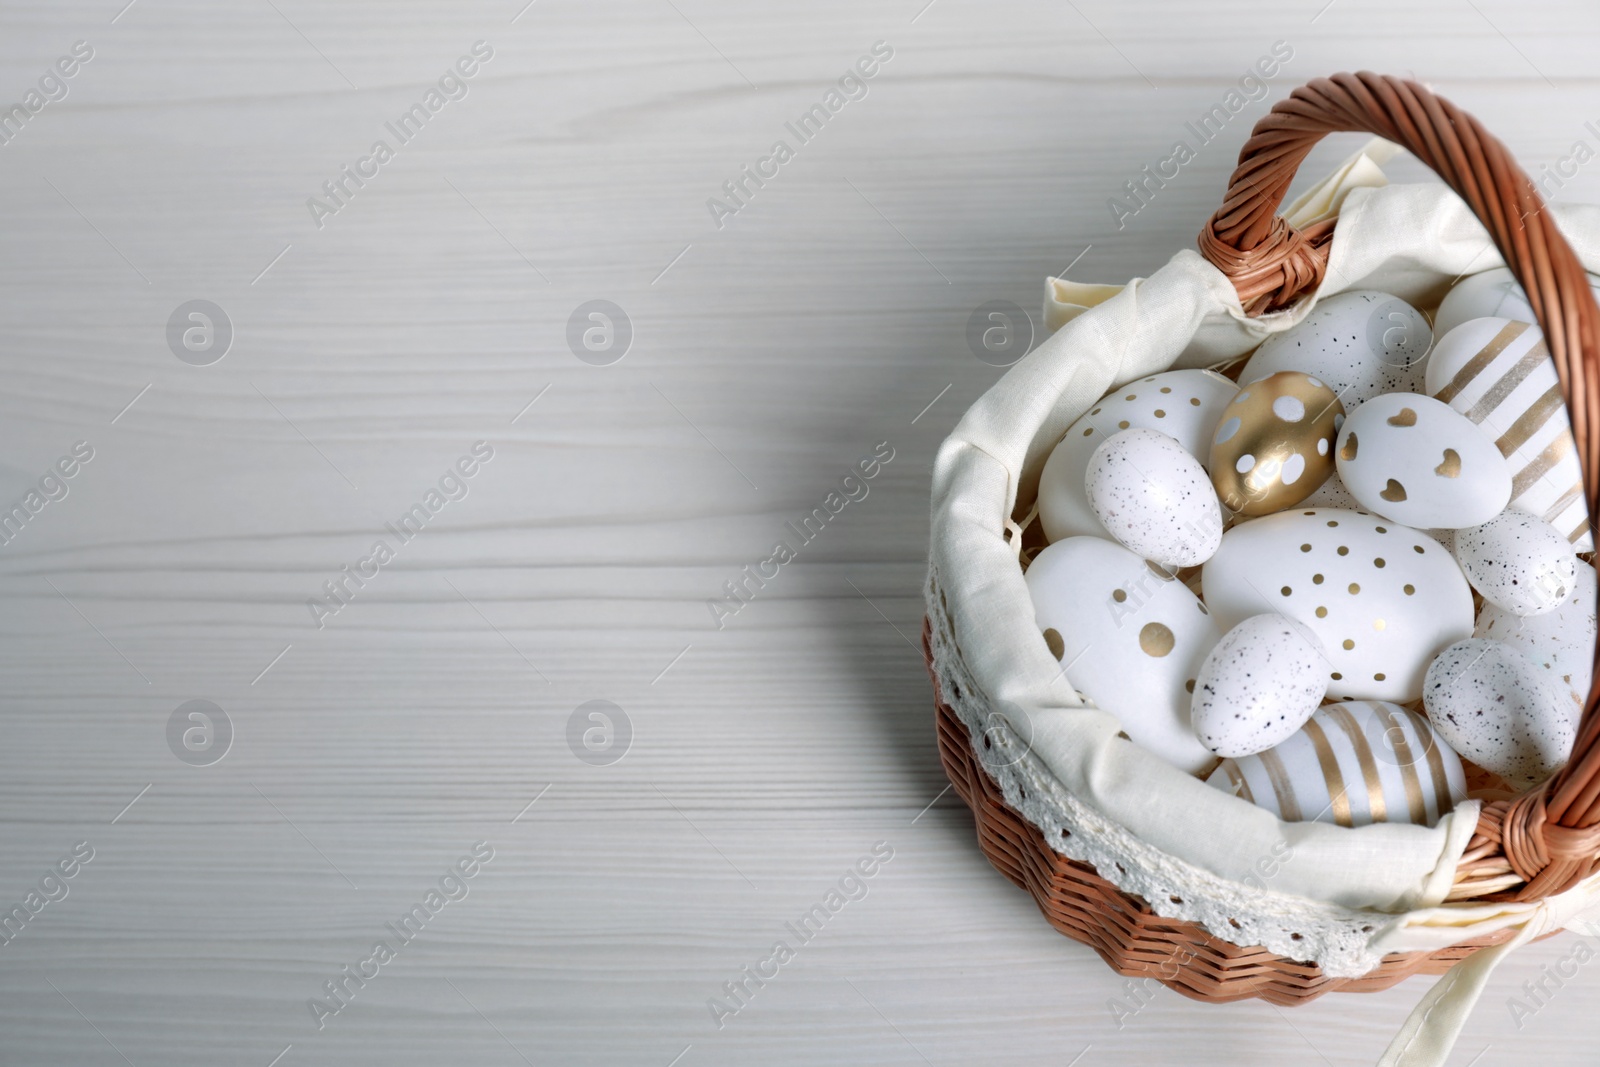 Photo of Wicker basket with festively decorated Easter eggs on white wooden table, above view. Space for text